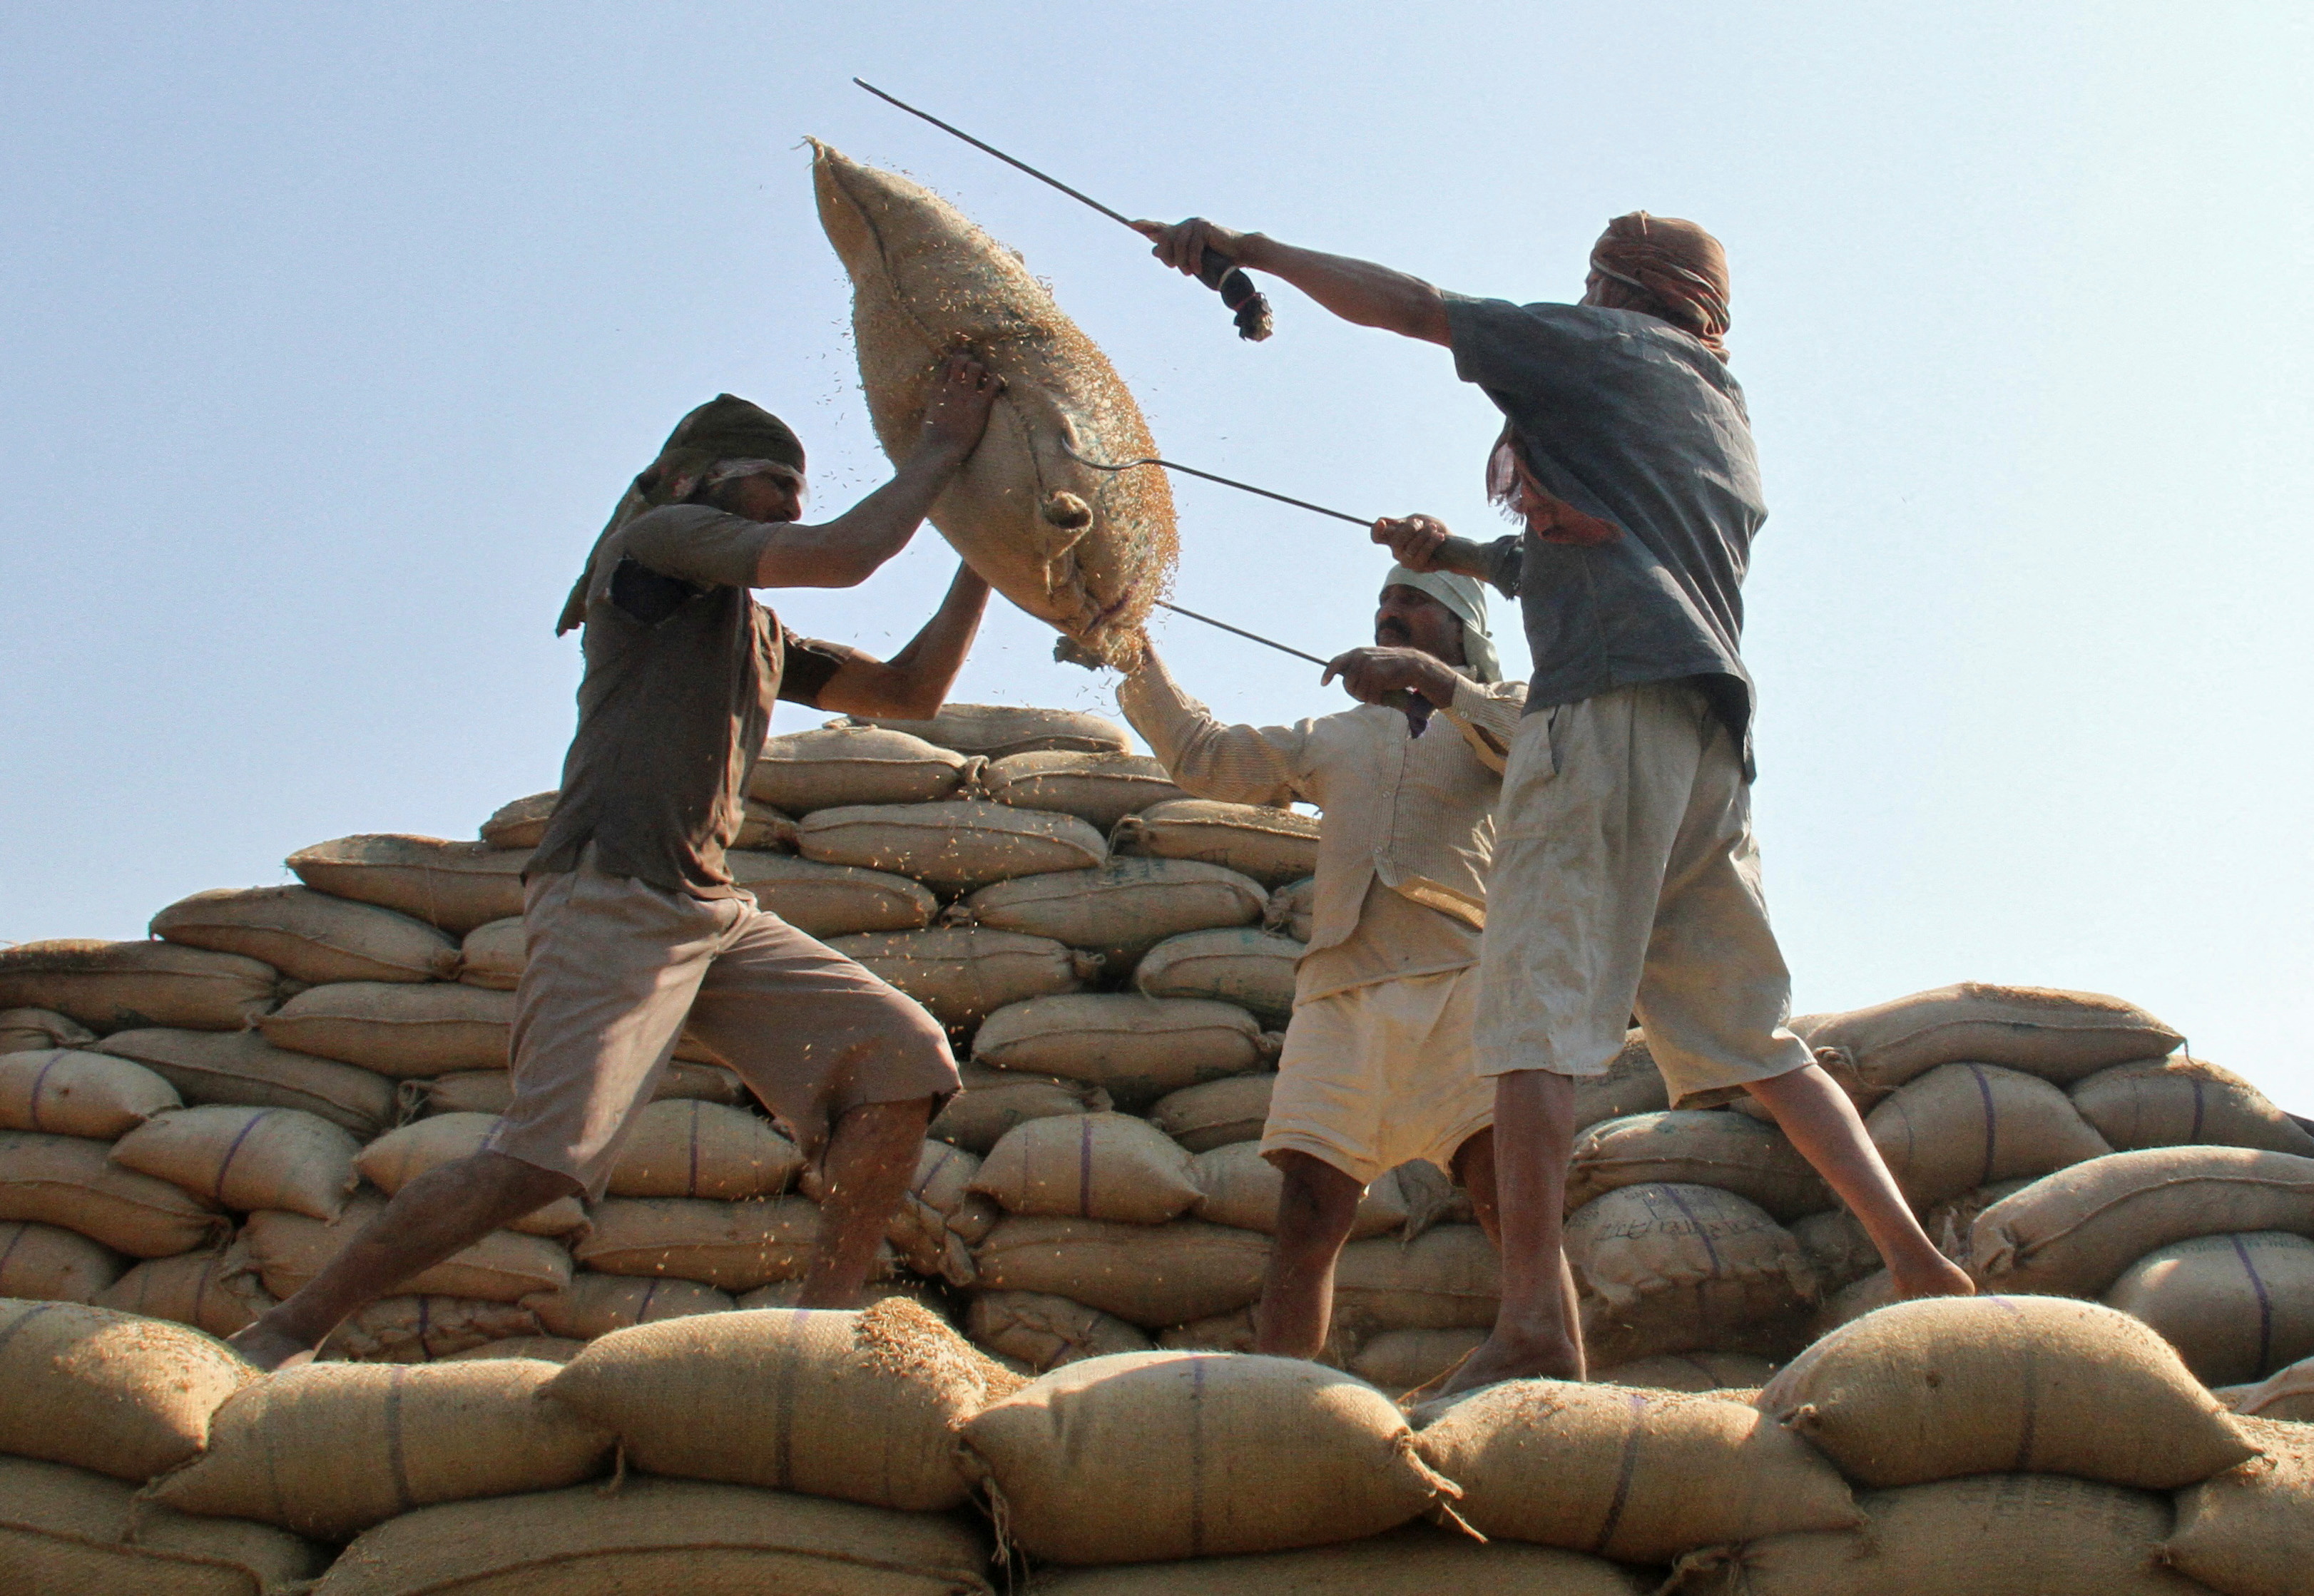 Workers lift a sack of rice to load onto a truck at a wholesale grain market in Chandigarh, India